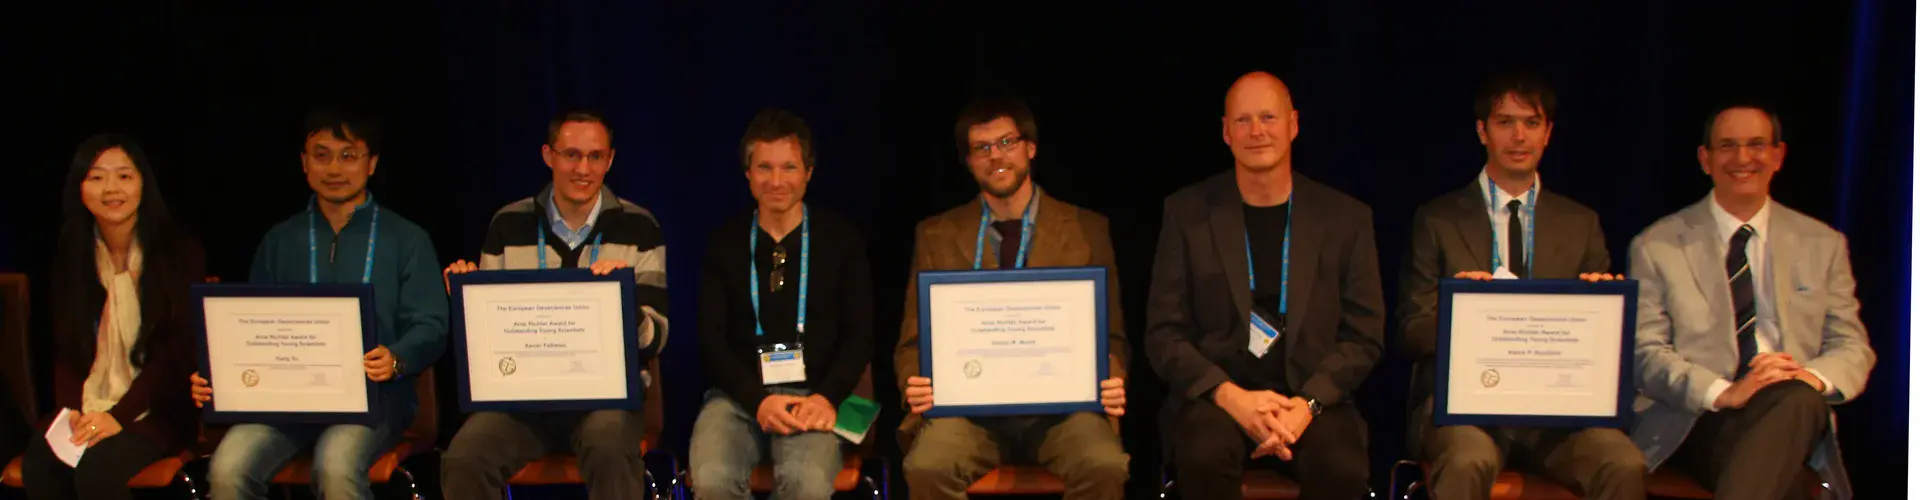 2013 Award Ceremony: Arne Richter awardees and their nominators